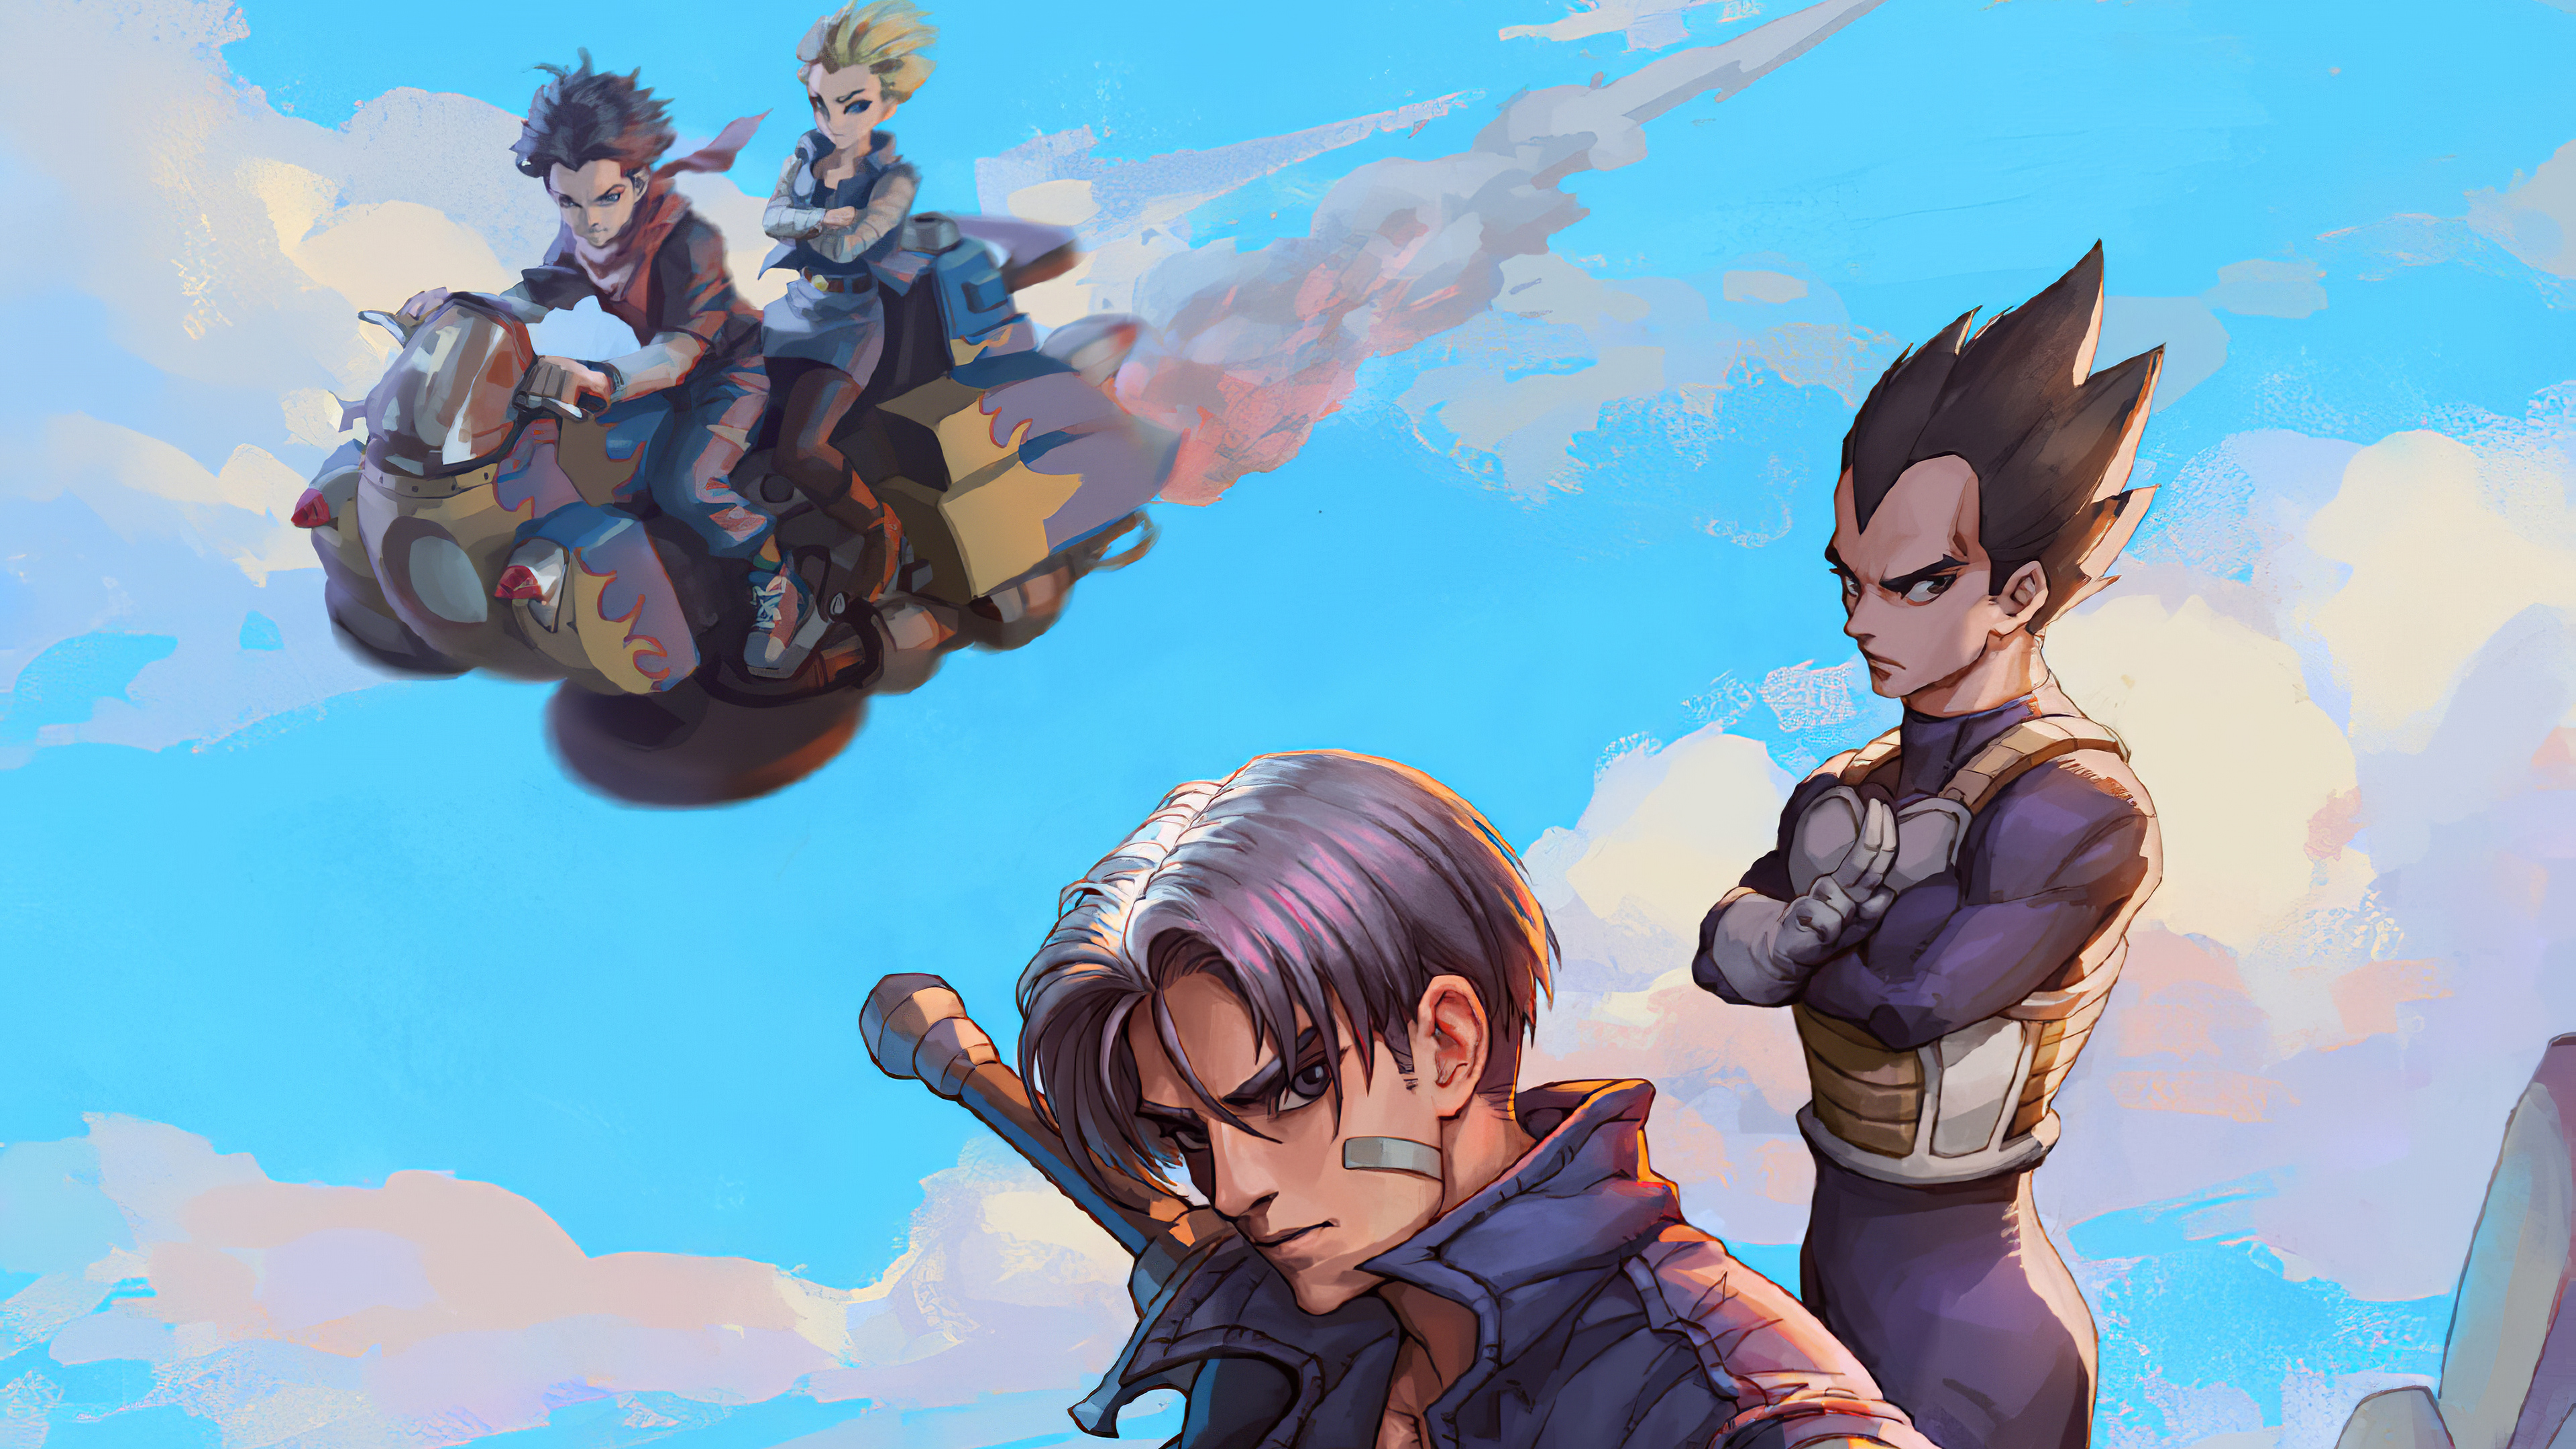 100+ Trunks (Dragon Ball) HD Wallpapers and Backgrounds